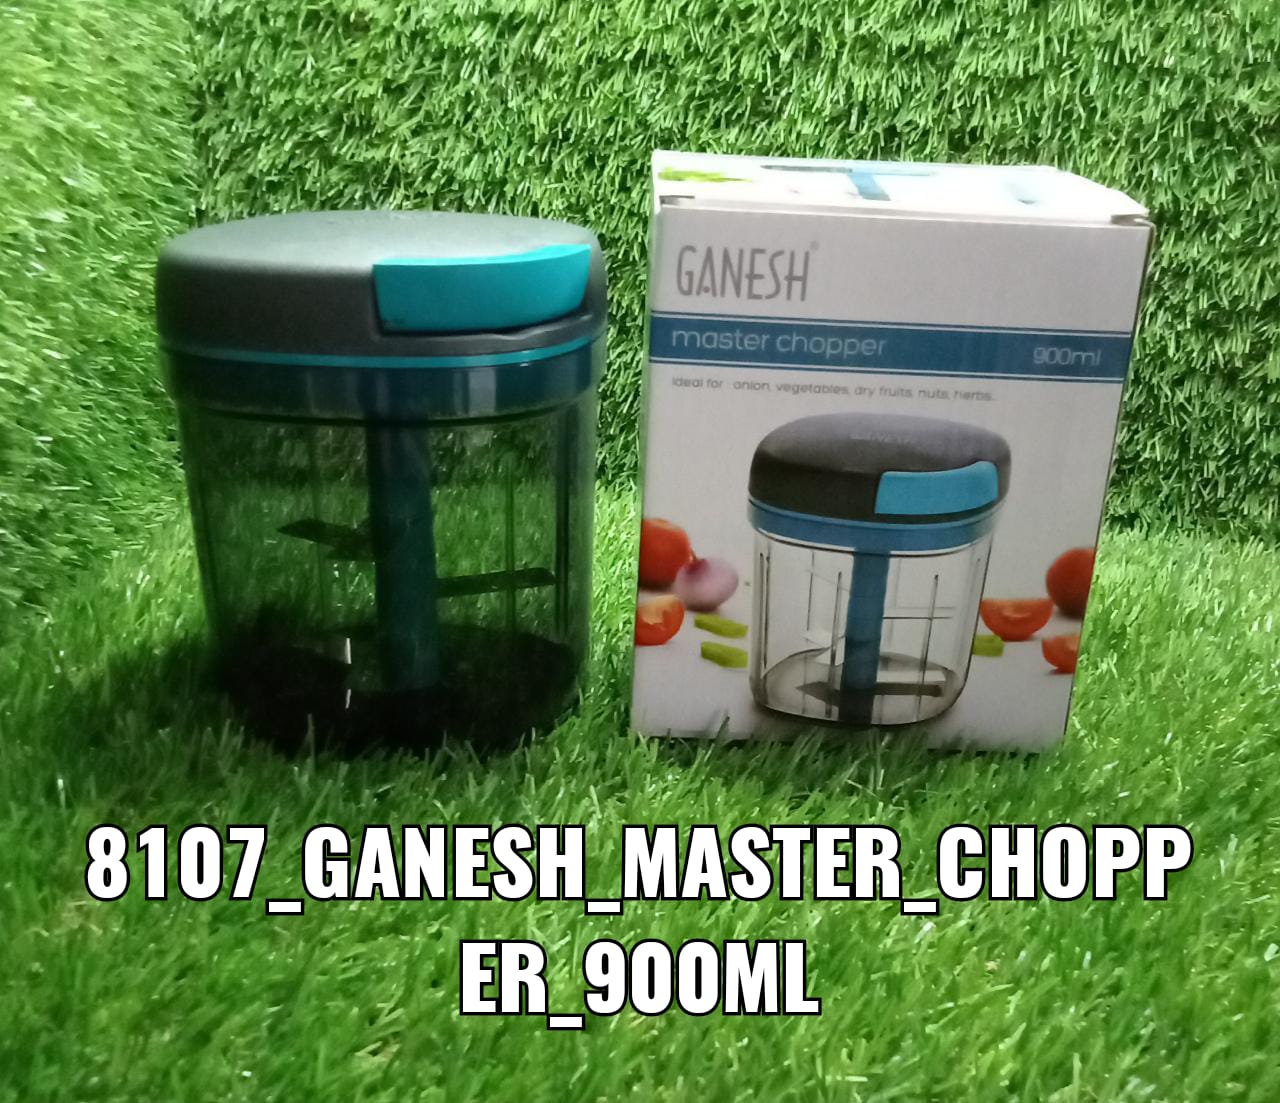 8107 Ganesh Master Chopper with 5 Stainless Steel Blades, XL Large Jumbo Chopper (900 Ml) 